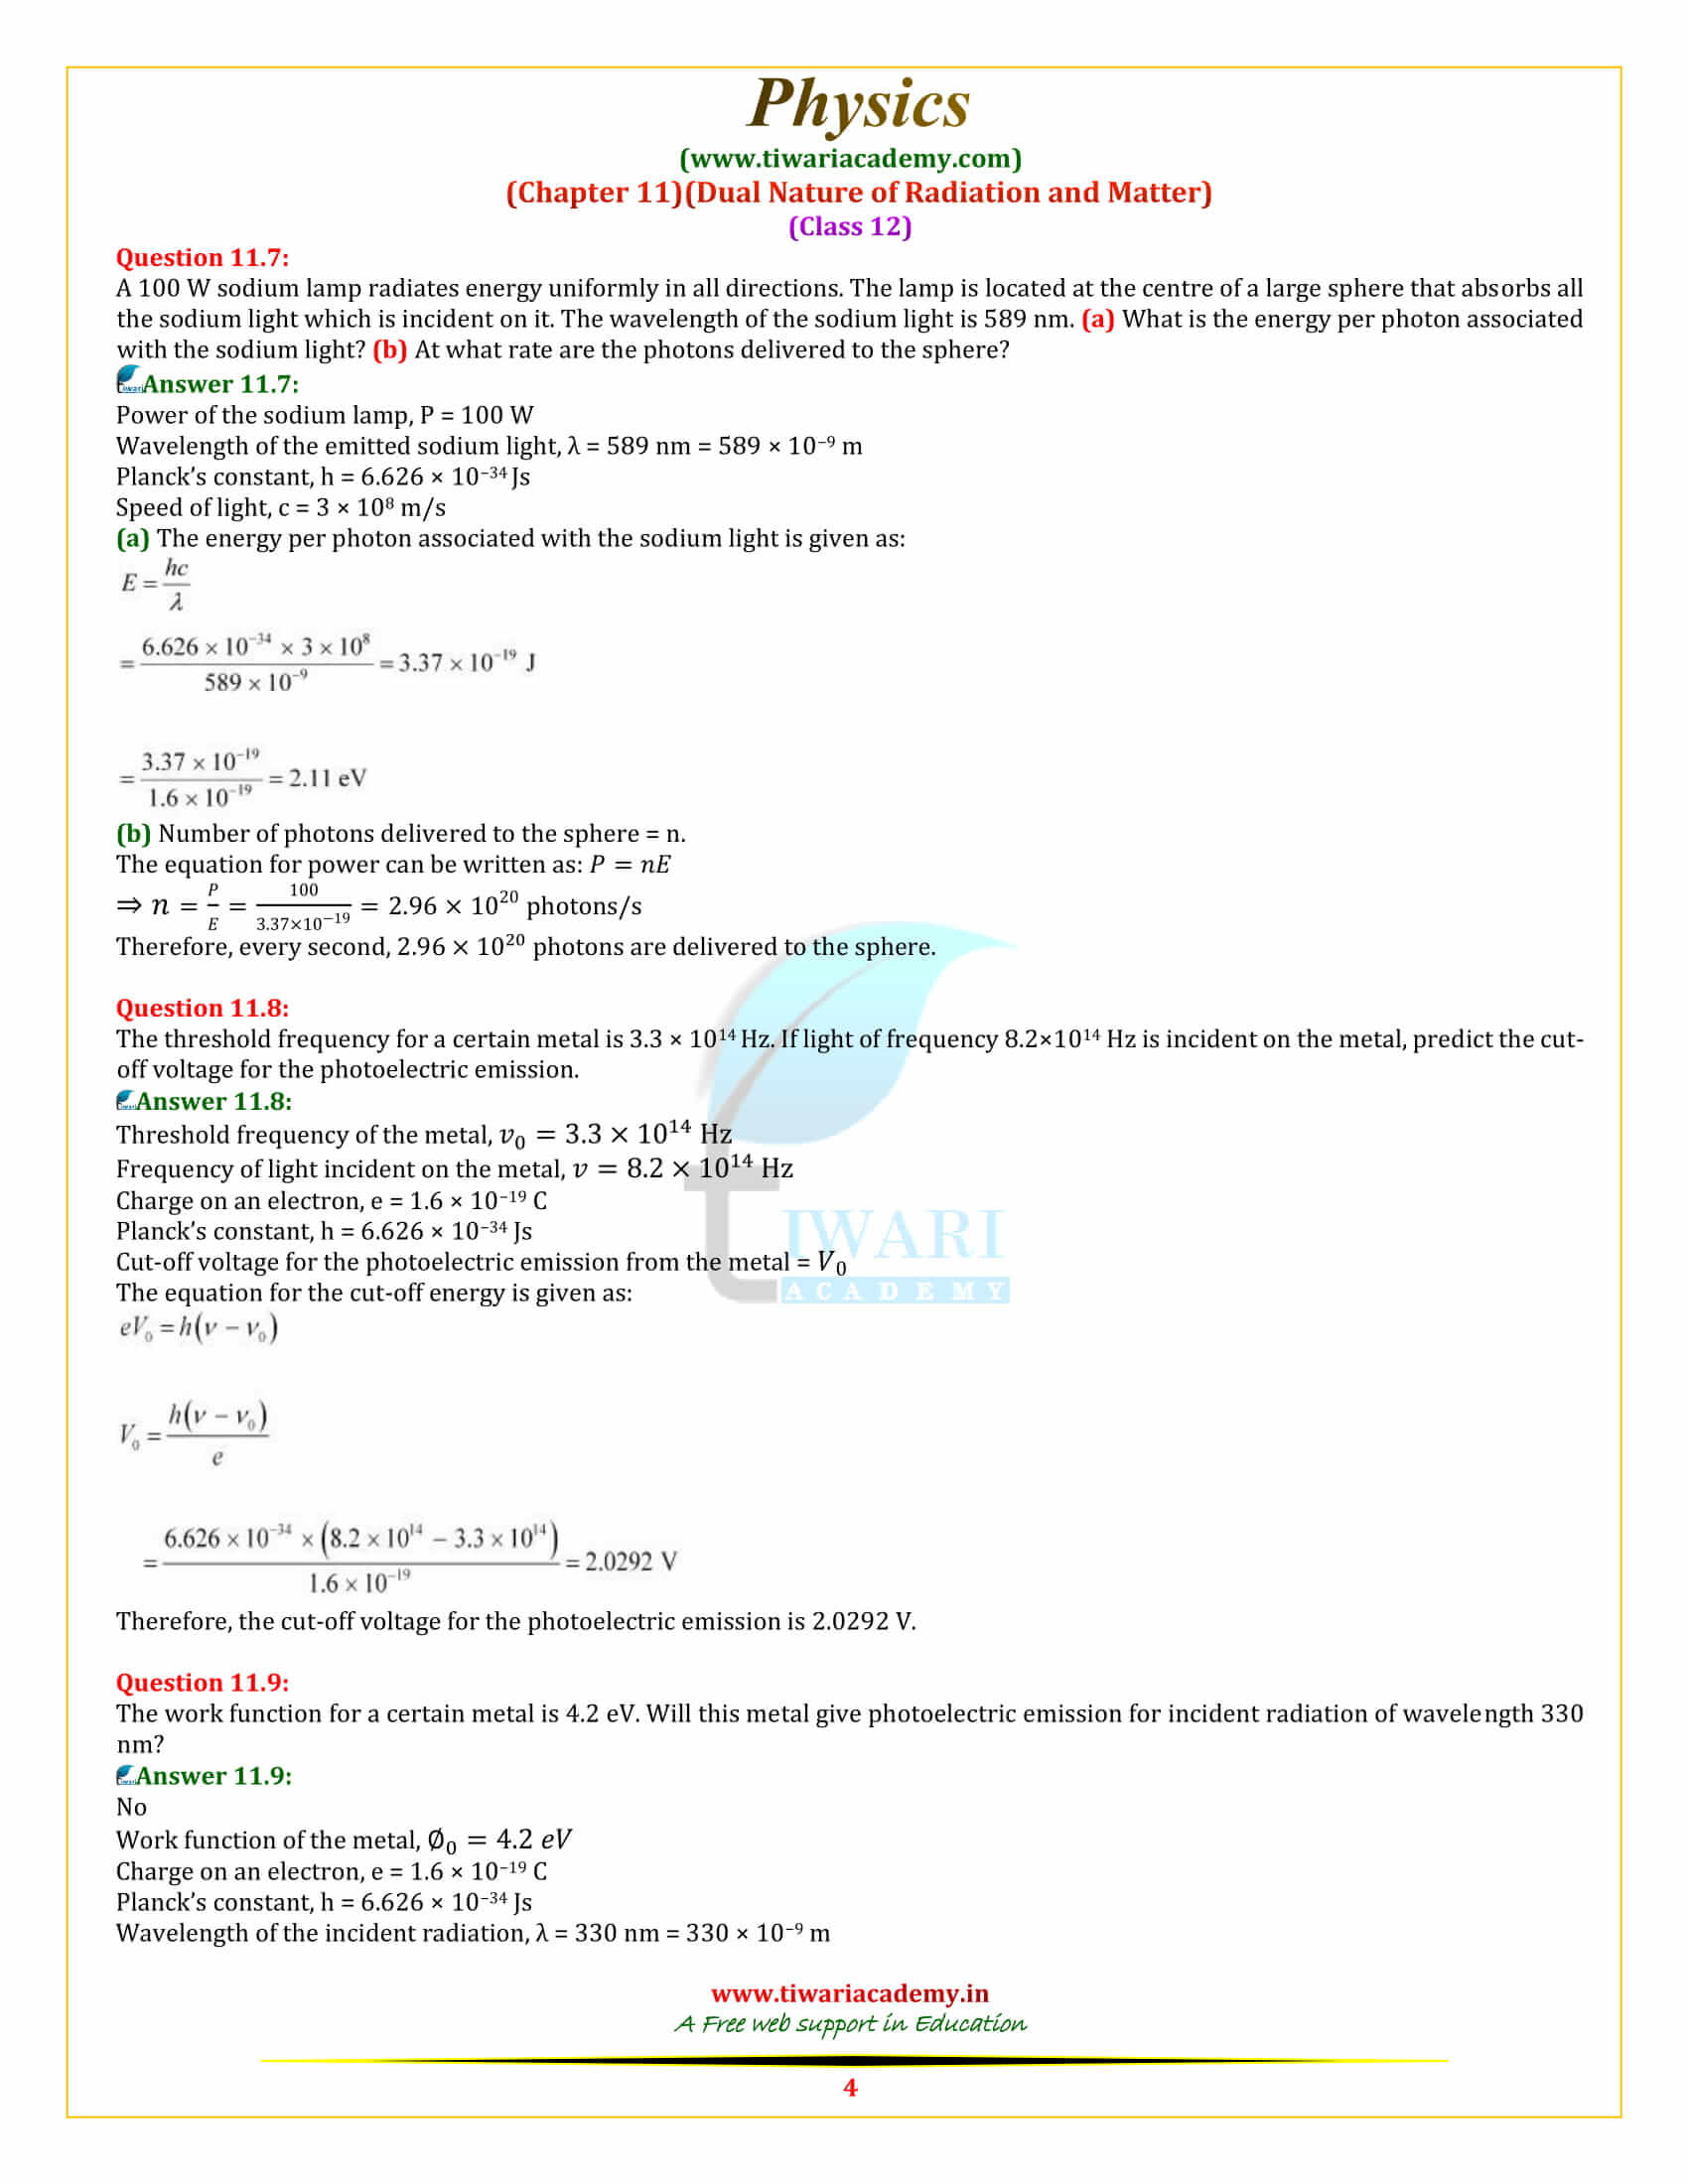 NCERT Solutions for Class 12 Physics Chapter 11 Dual Nature